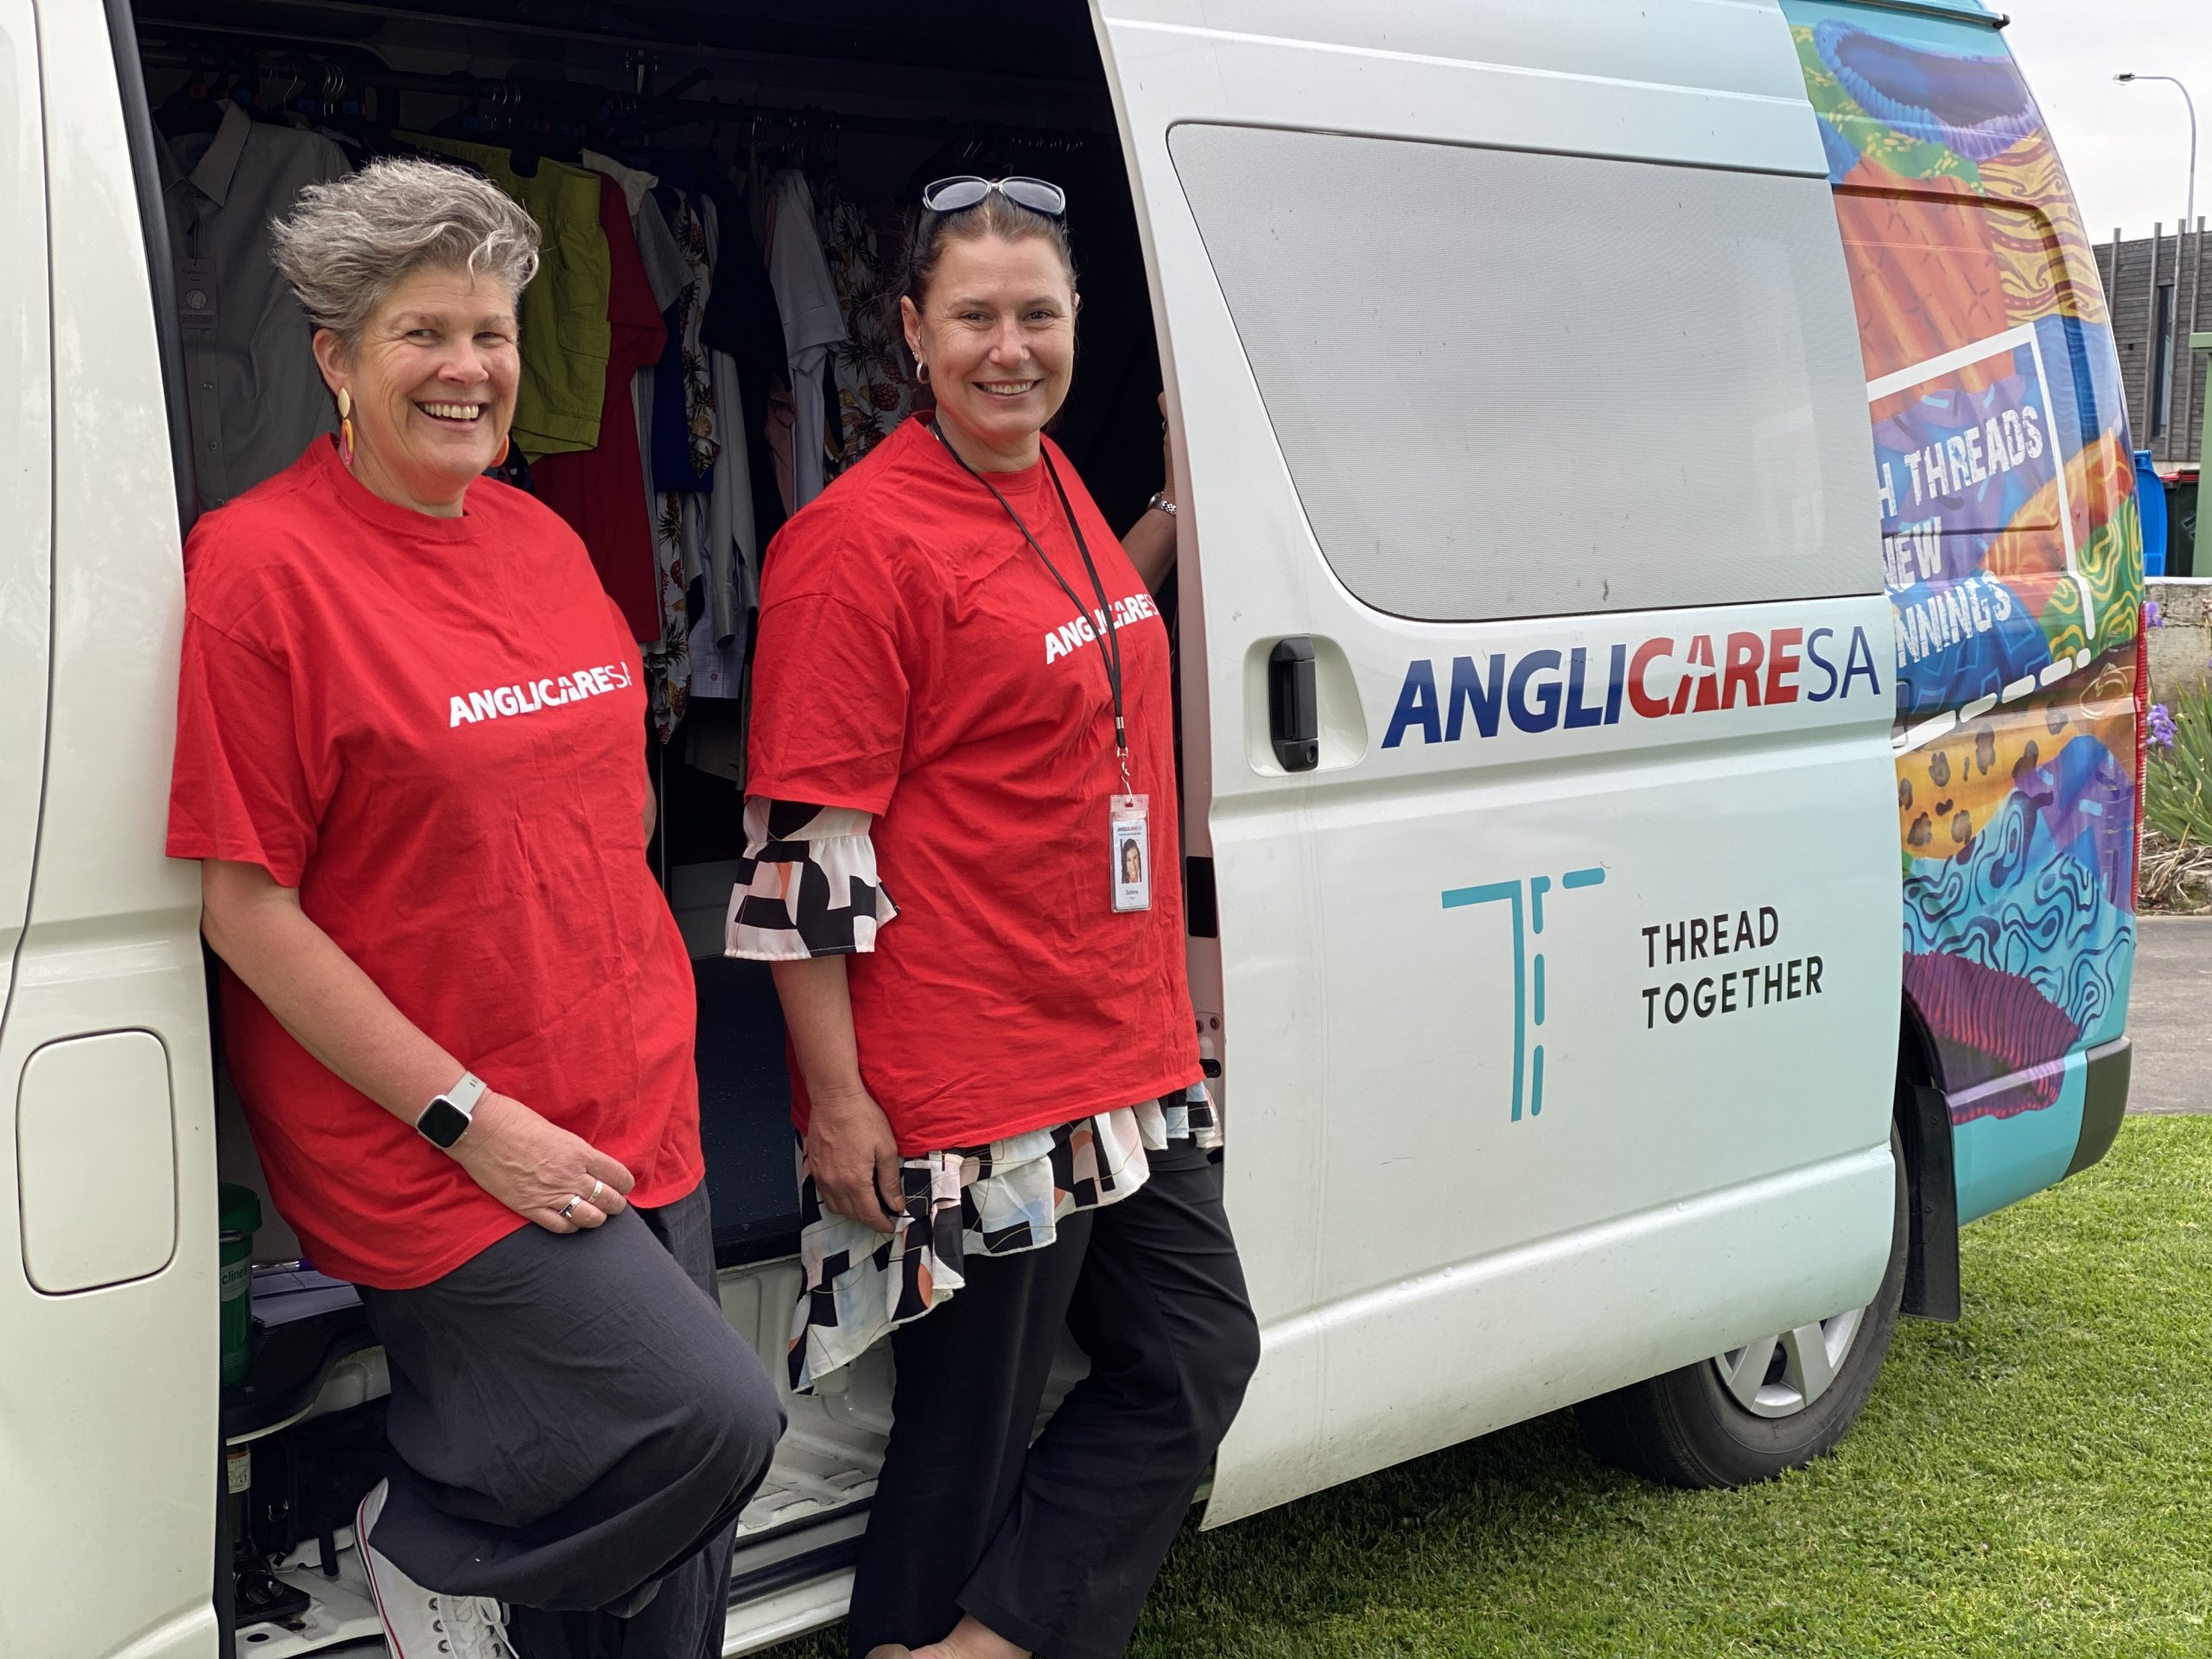 WELCOME TO THE BOUTIQUE: AnglicareSA staff Stephanie Ashby and Selena Hart welcomed ac.care Limestone Coast Homelessness Service clients and other visitors to the Thread Together clothing van to choose a free set of new clothing during a visit to the Mount Gambier Community Centre last month.